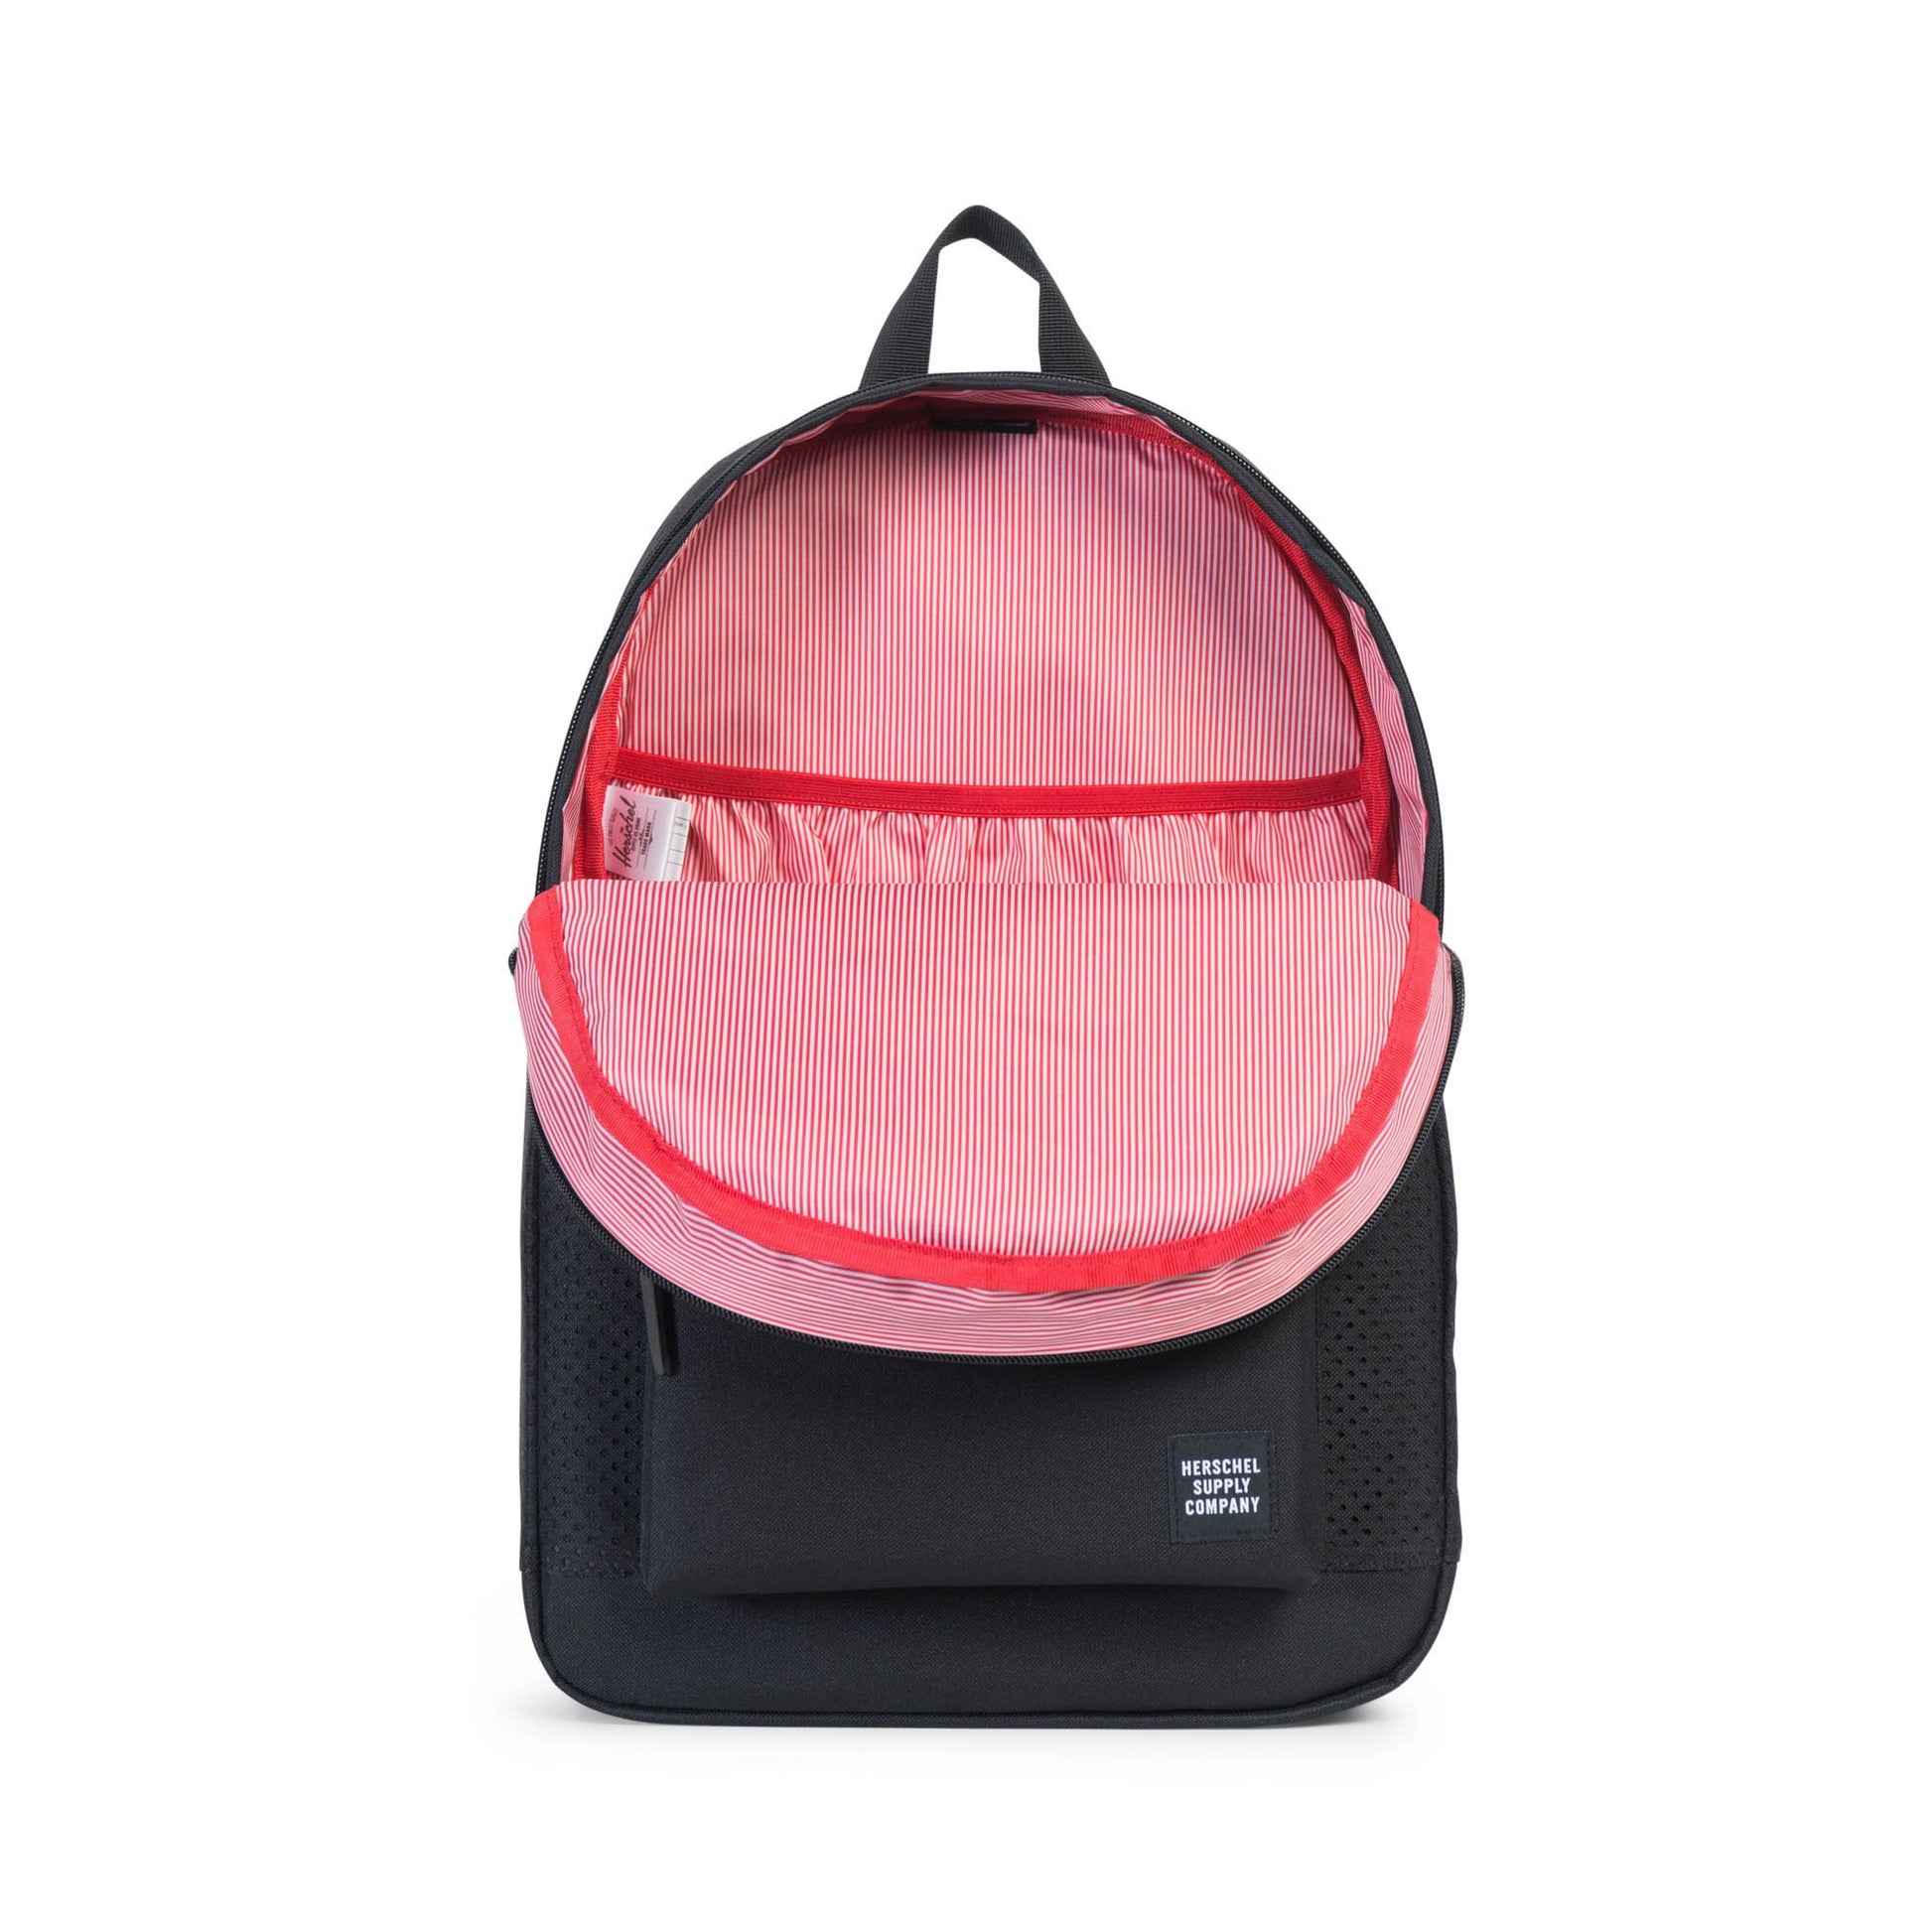 Herschel Supply Co. - Settlement Backpack, Perforated Black/Black - The Giant Peach